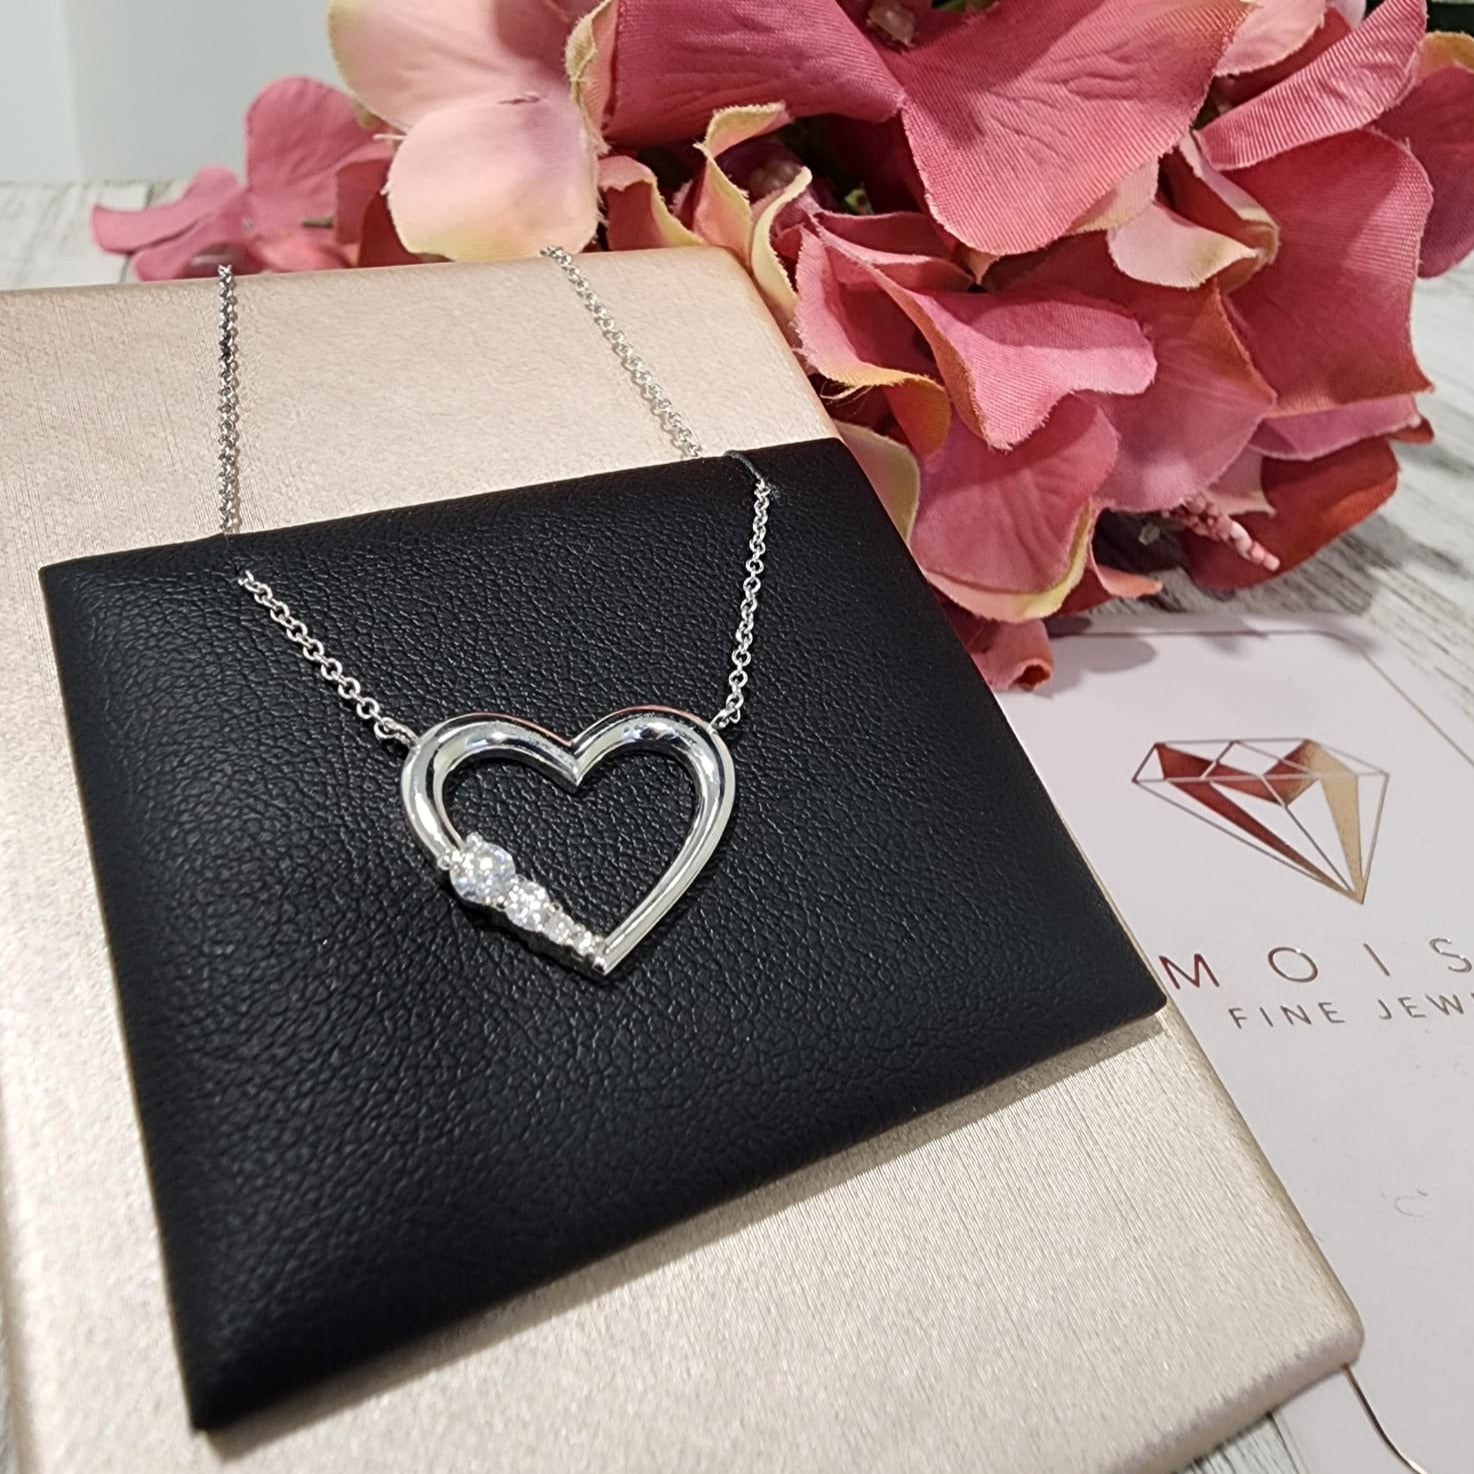 Wallets & Accessories - Heart and Home Gifts and Accessories